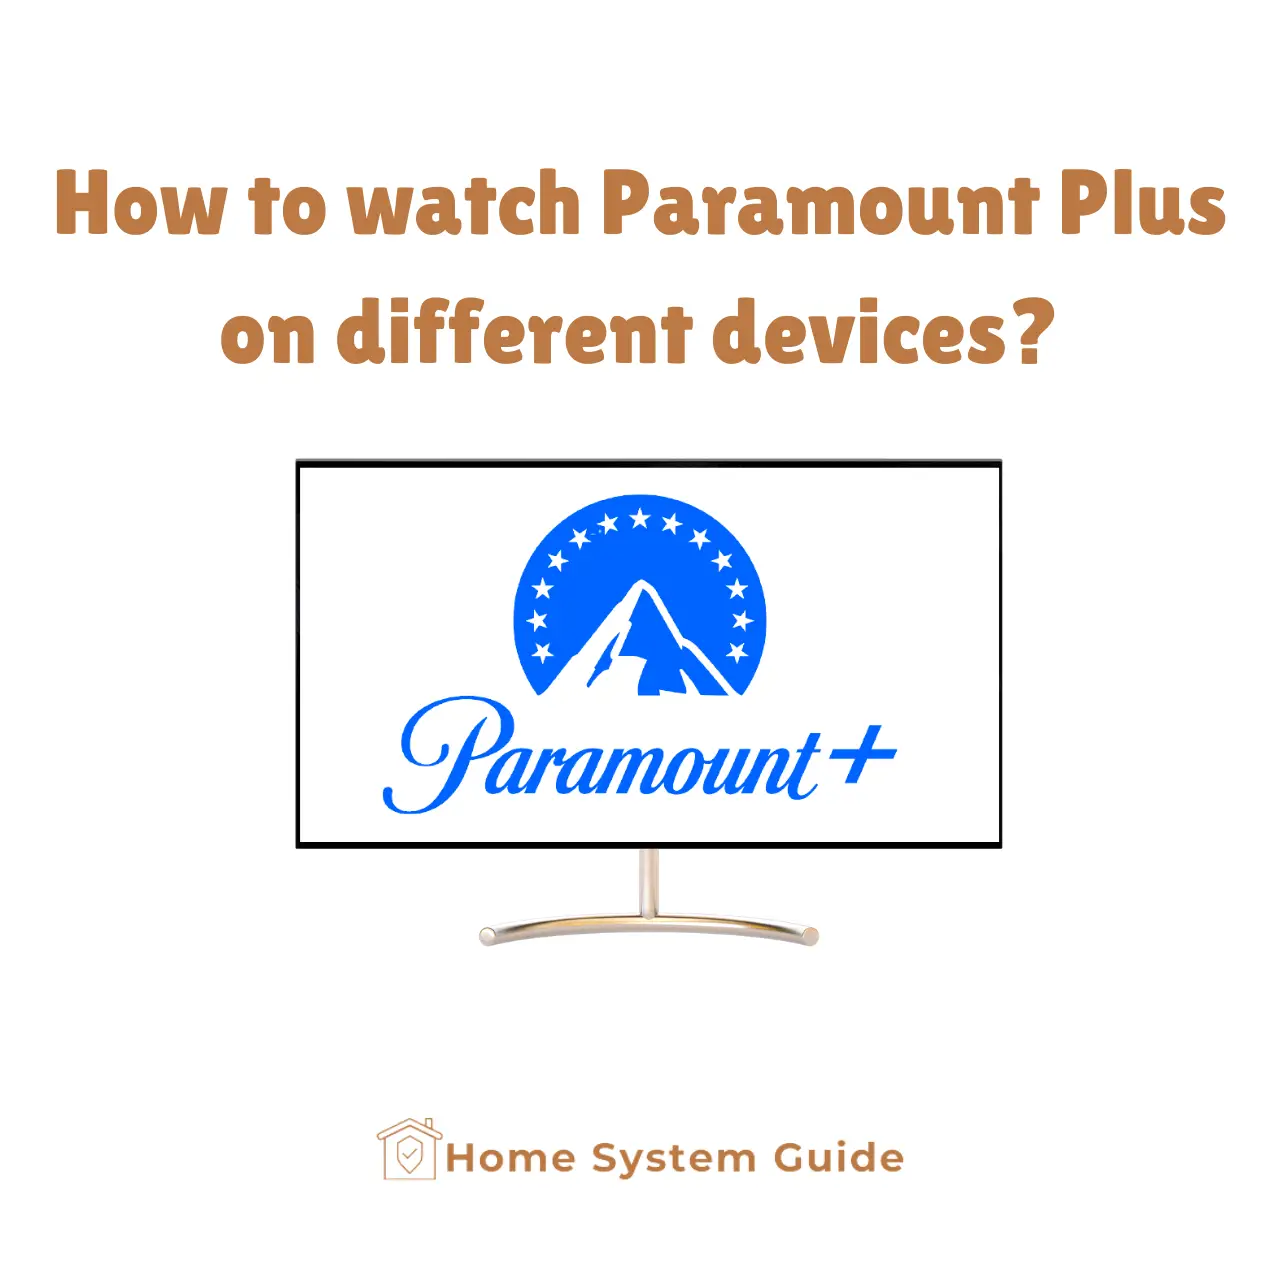 Watch Paramount Plus on different devices